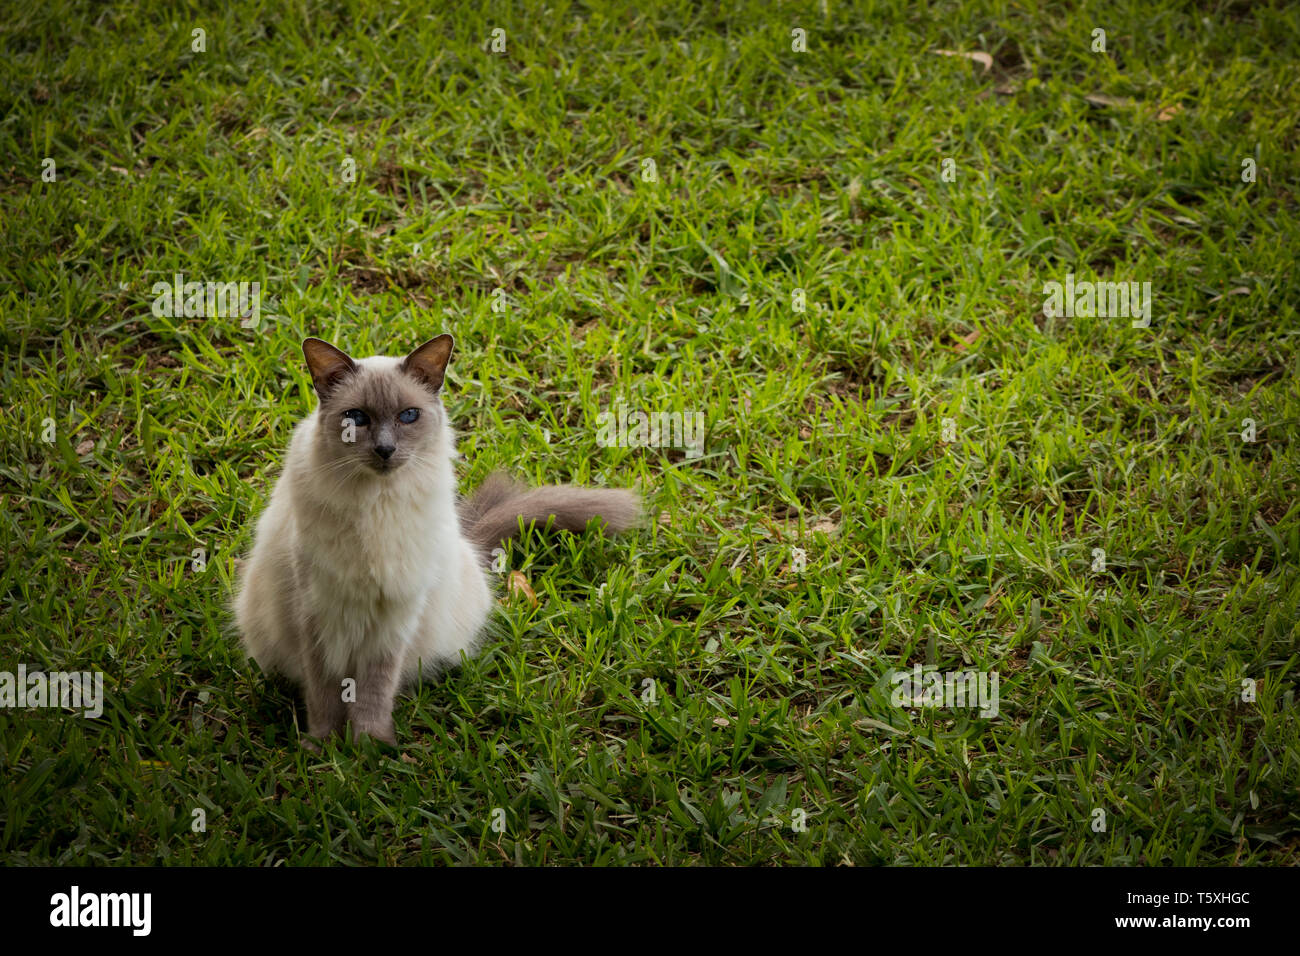 Balinese cat on green lawn Stock Photo